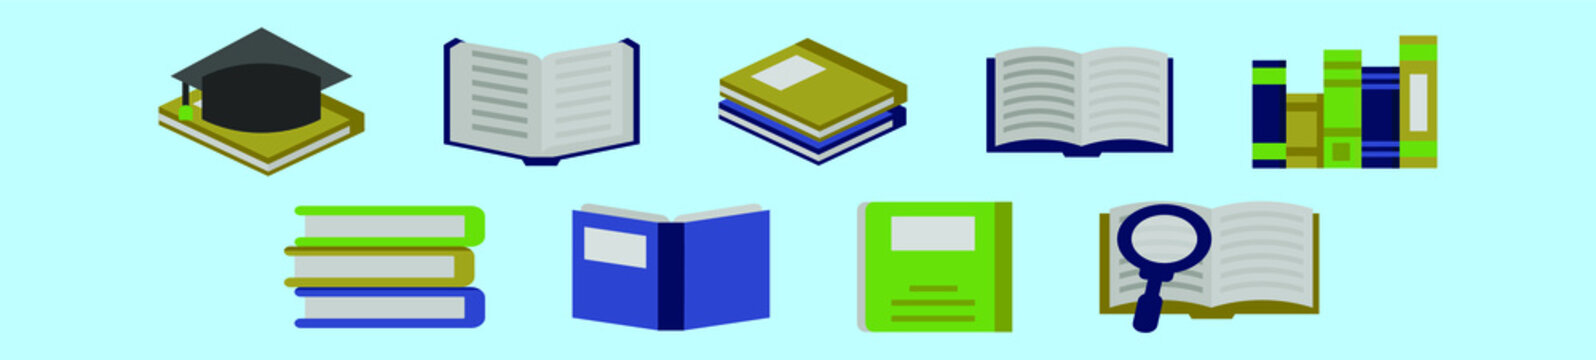 set of book cartoon icon design template with various models. vector illustration isolated on blue background